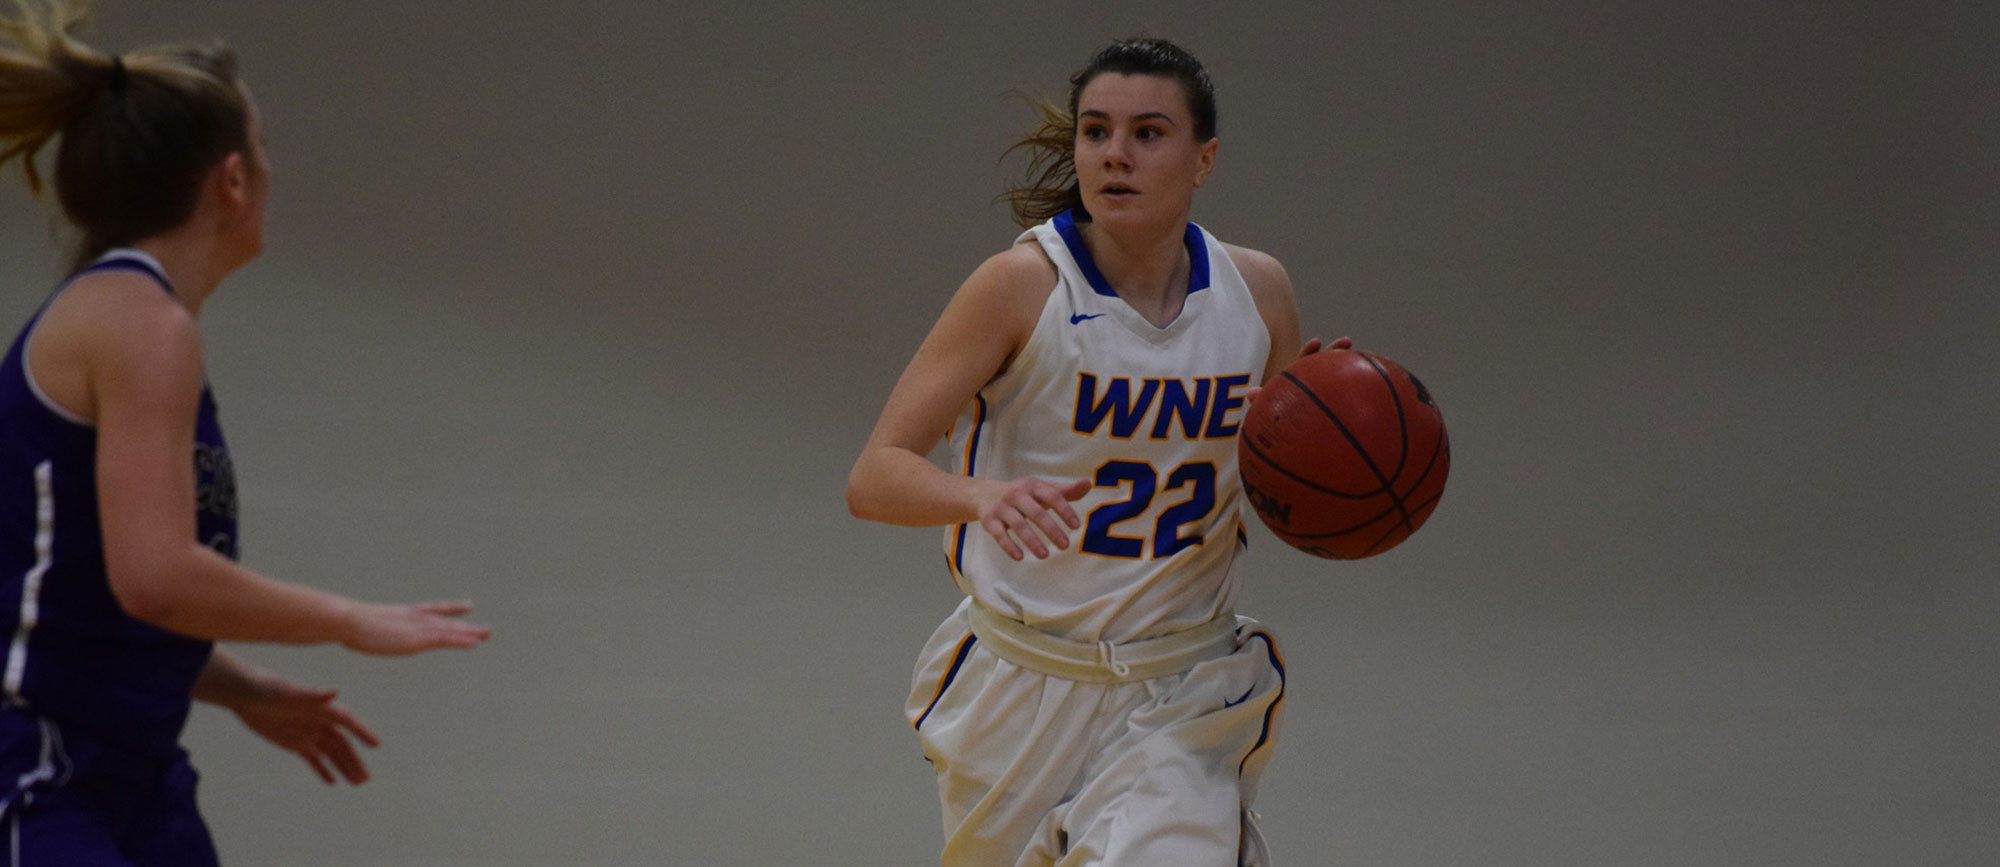 Emily Farrell scored 14 points in Western New England's 59-53 loss to Roger Williams on Tuesday. (Photo by Rachael Margossian)